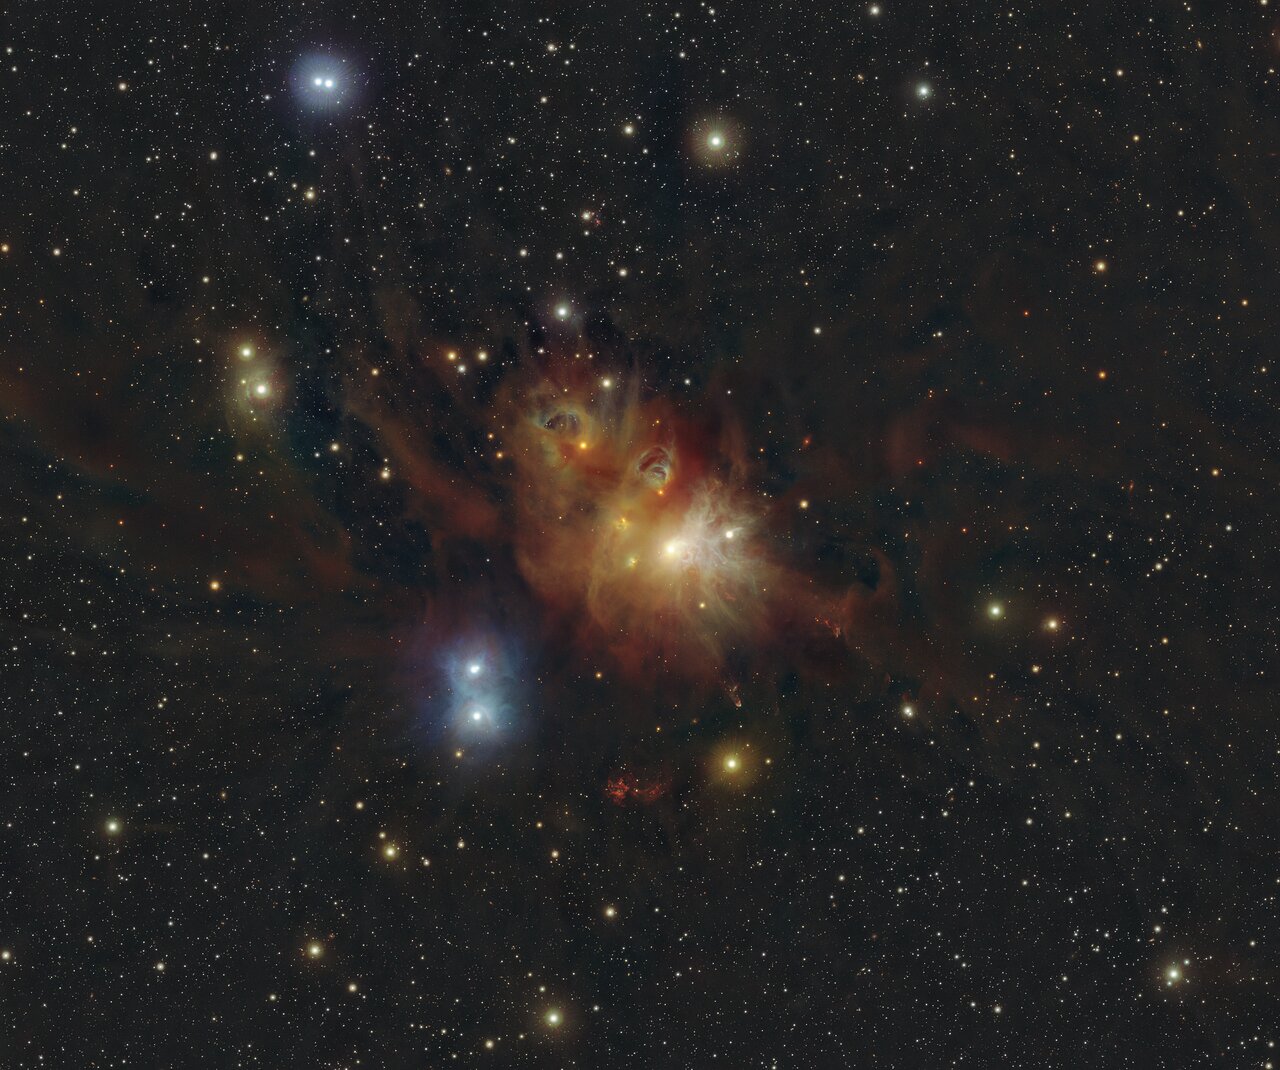 An infrared view of the region around the Coronet star cluster